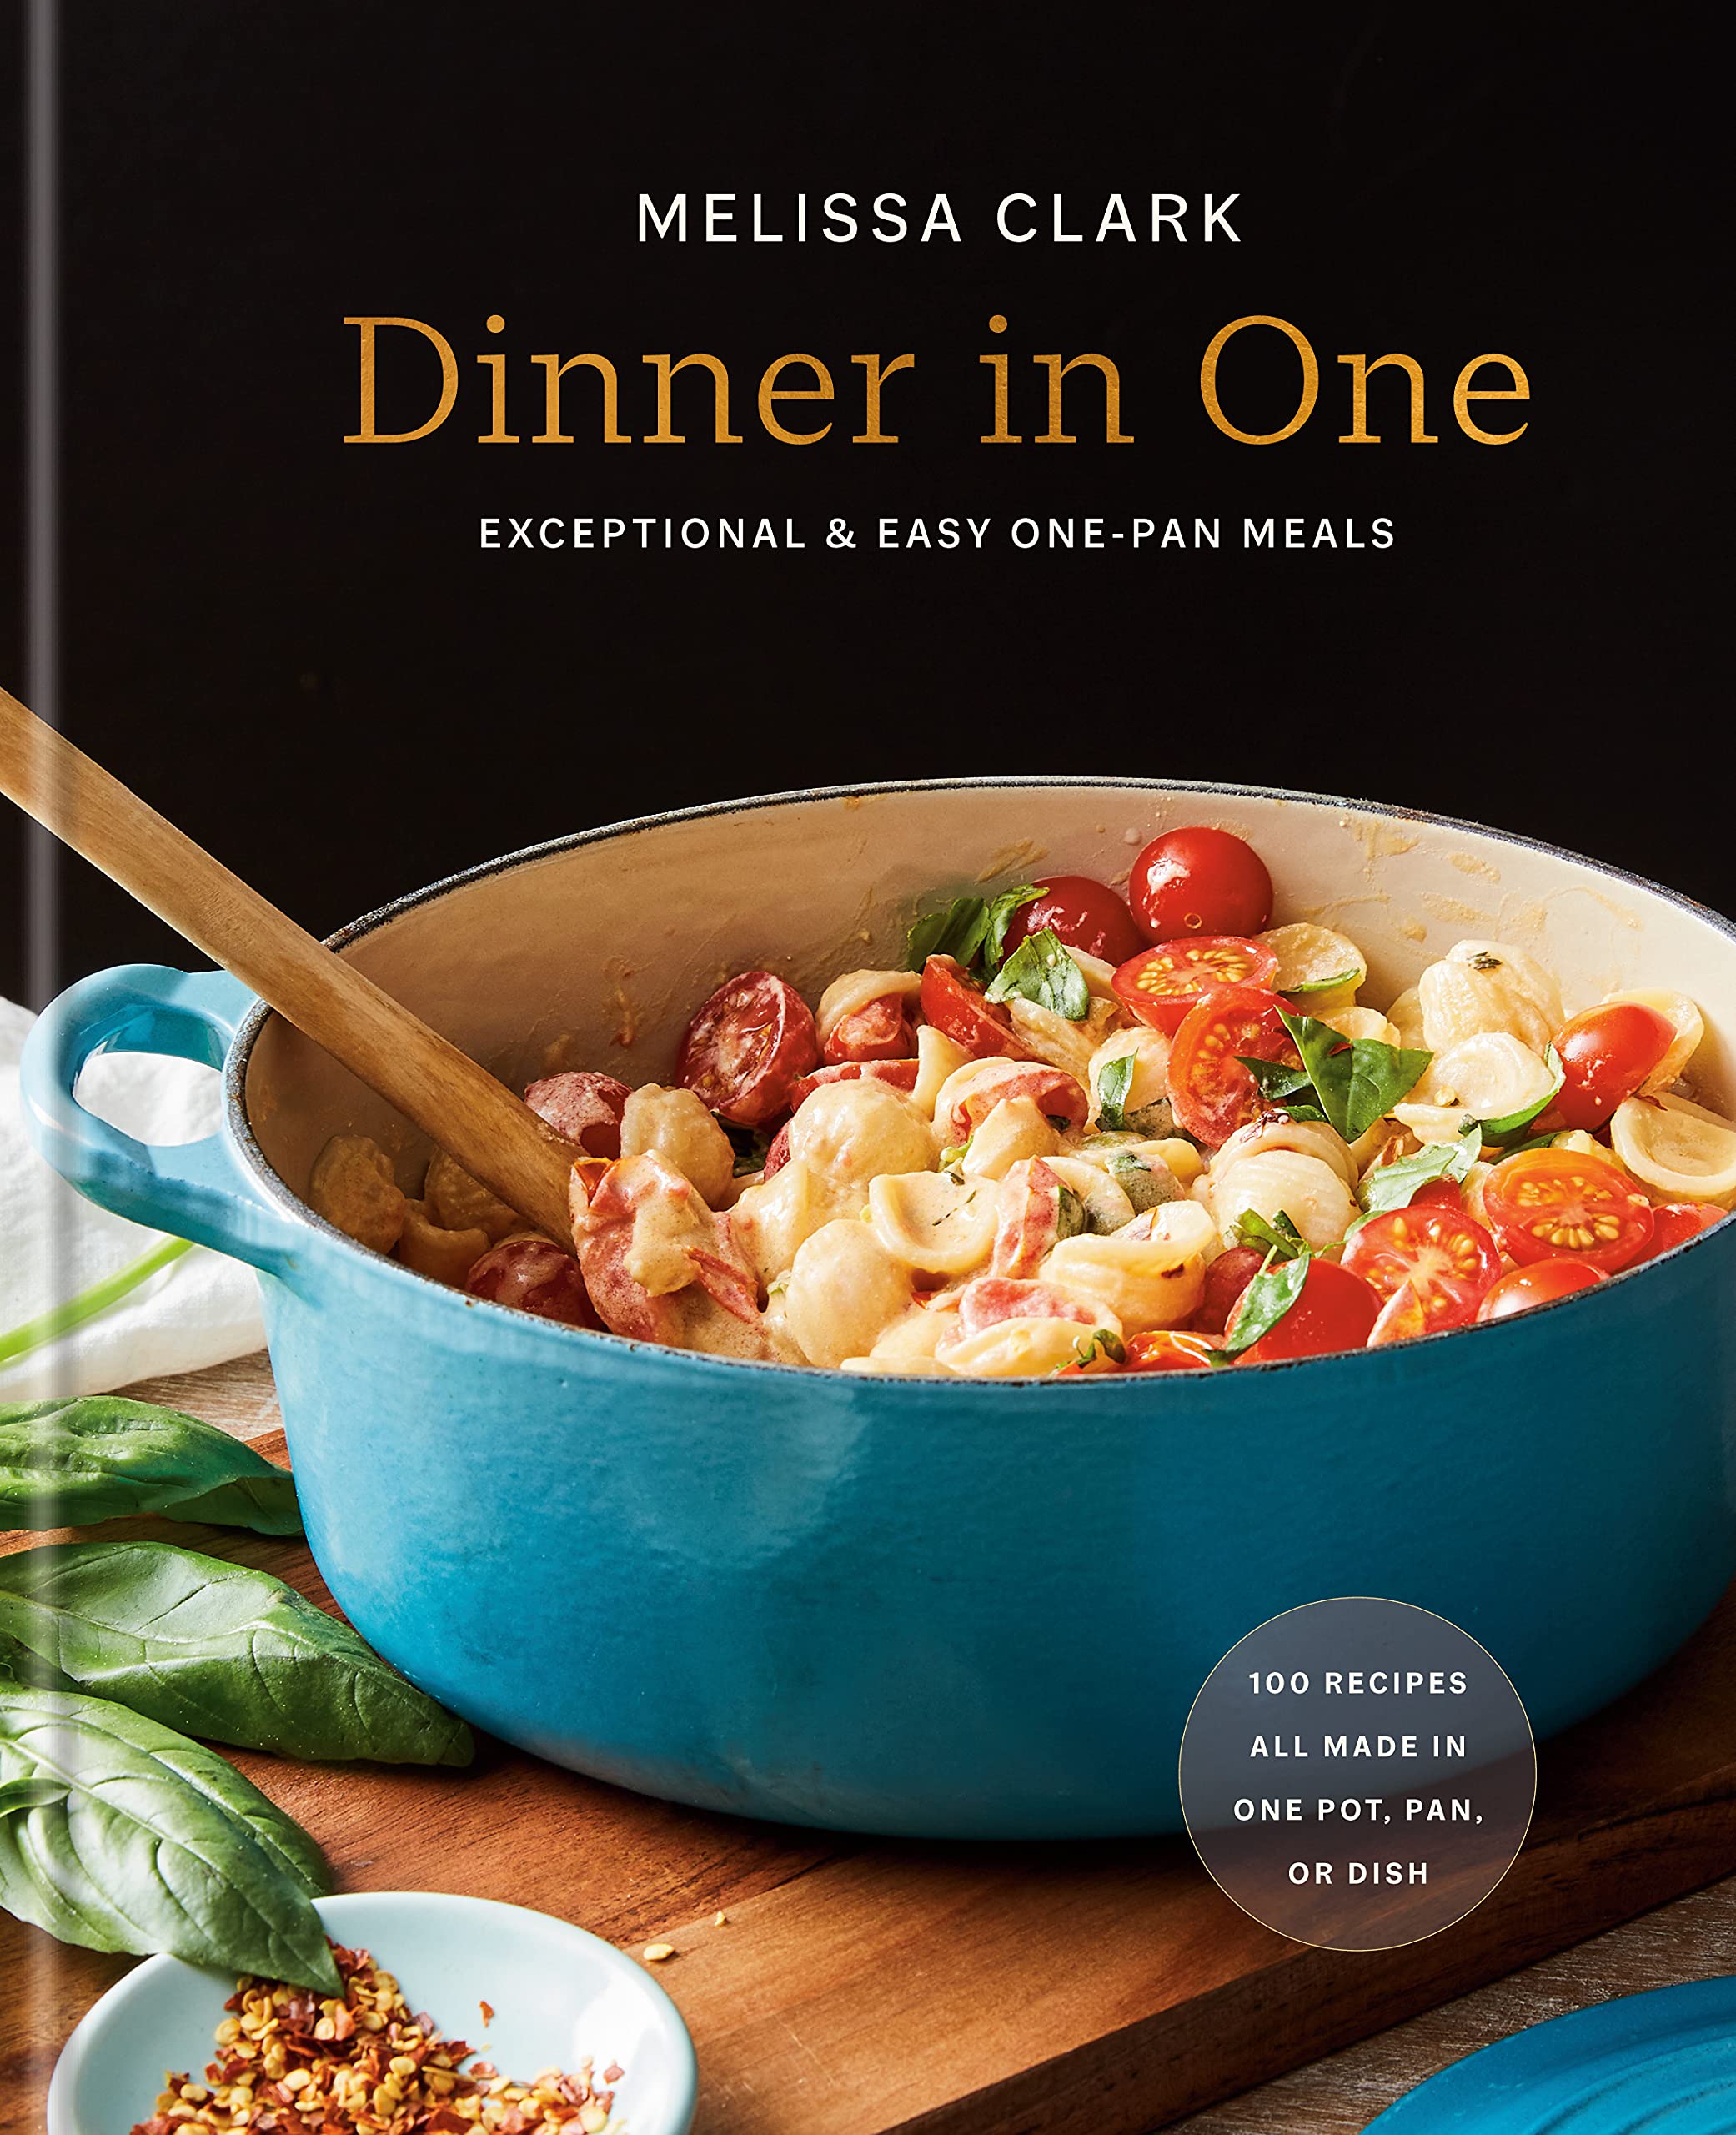 Dinner in One: Exceptional & Easy One-Pan Meals (Melissa Clark) *Signed*